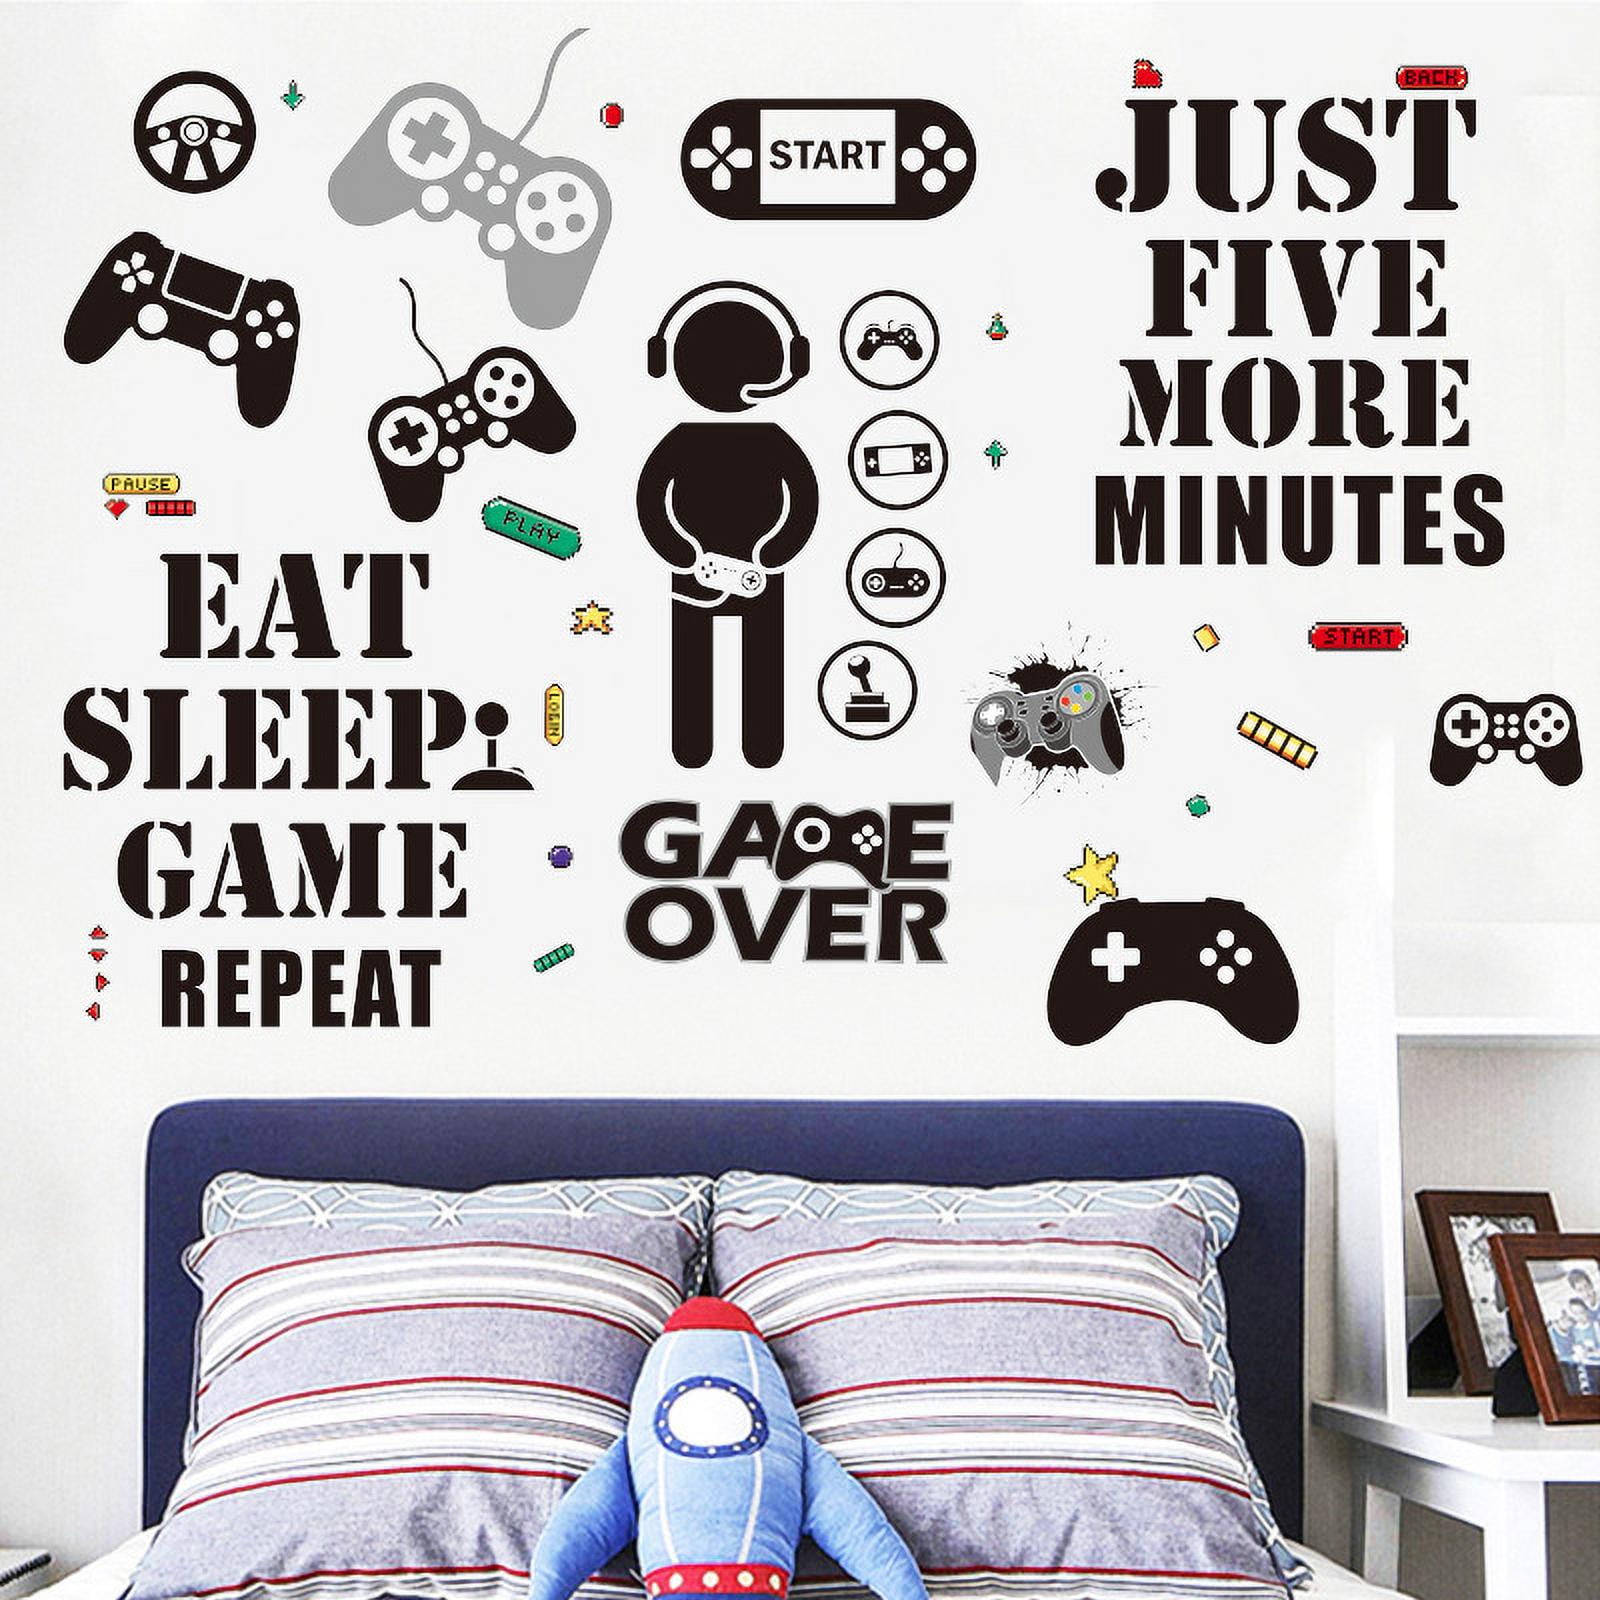 Sonic the Hedgehog Show Cartoon Classic Video Game Movie Character Wall  Sticker Wall Art Decal for Baby Kid Bedroom Nursery Kindergarten Daycare  Home